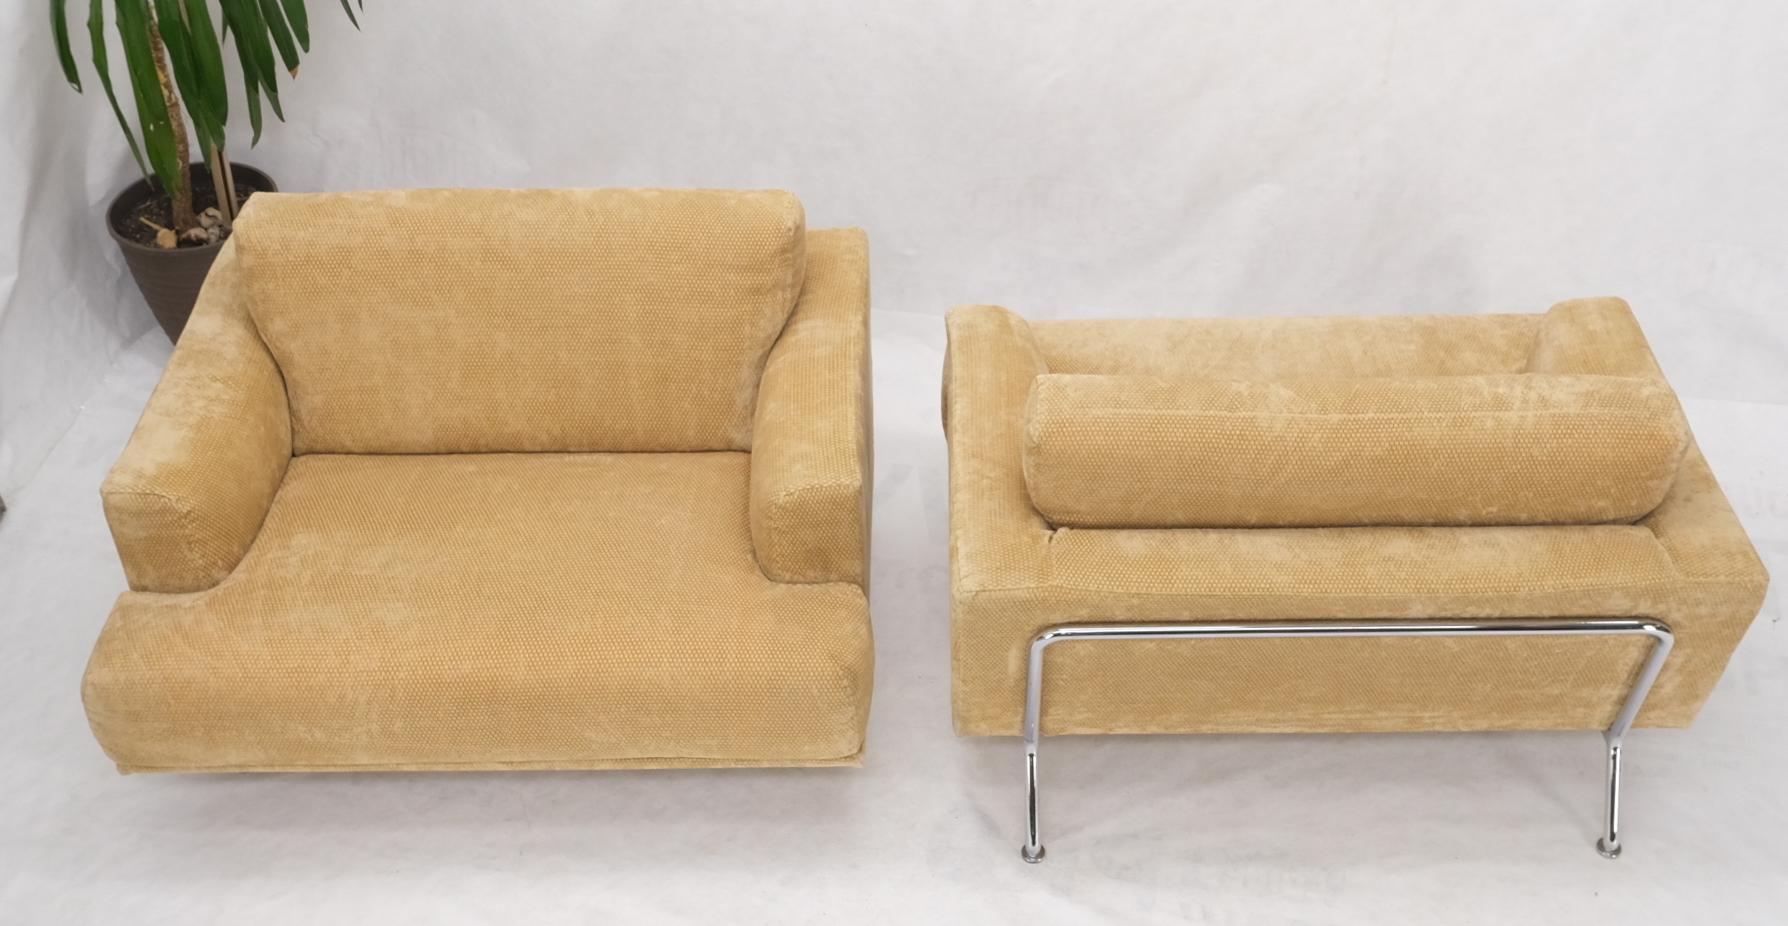 Pair of Wide Seat Almost Sattee Width Lounge Chairs by Cassina For Sale 9